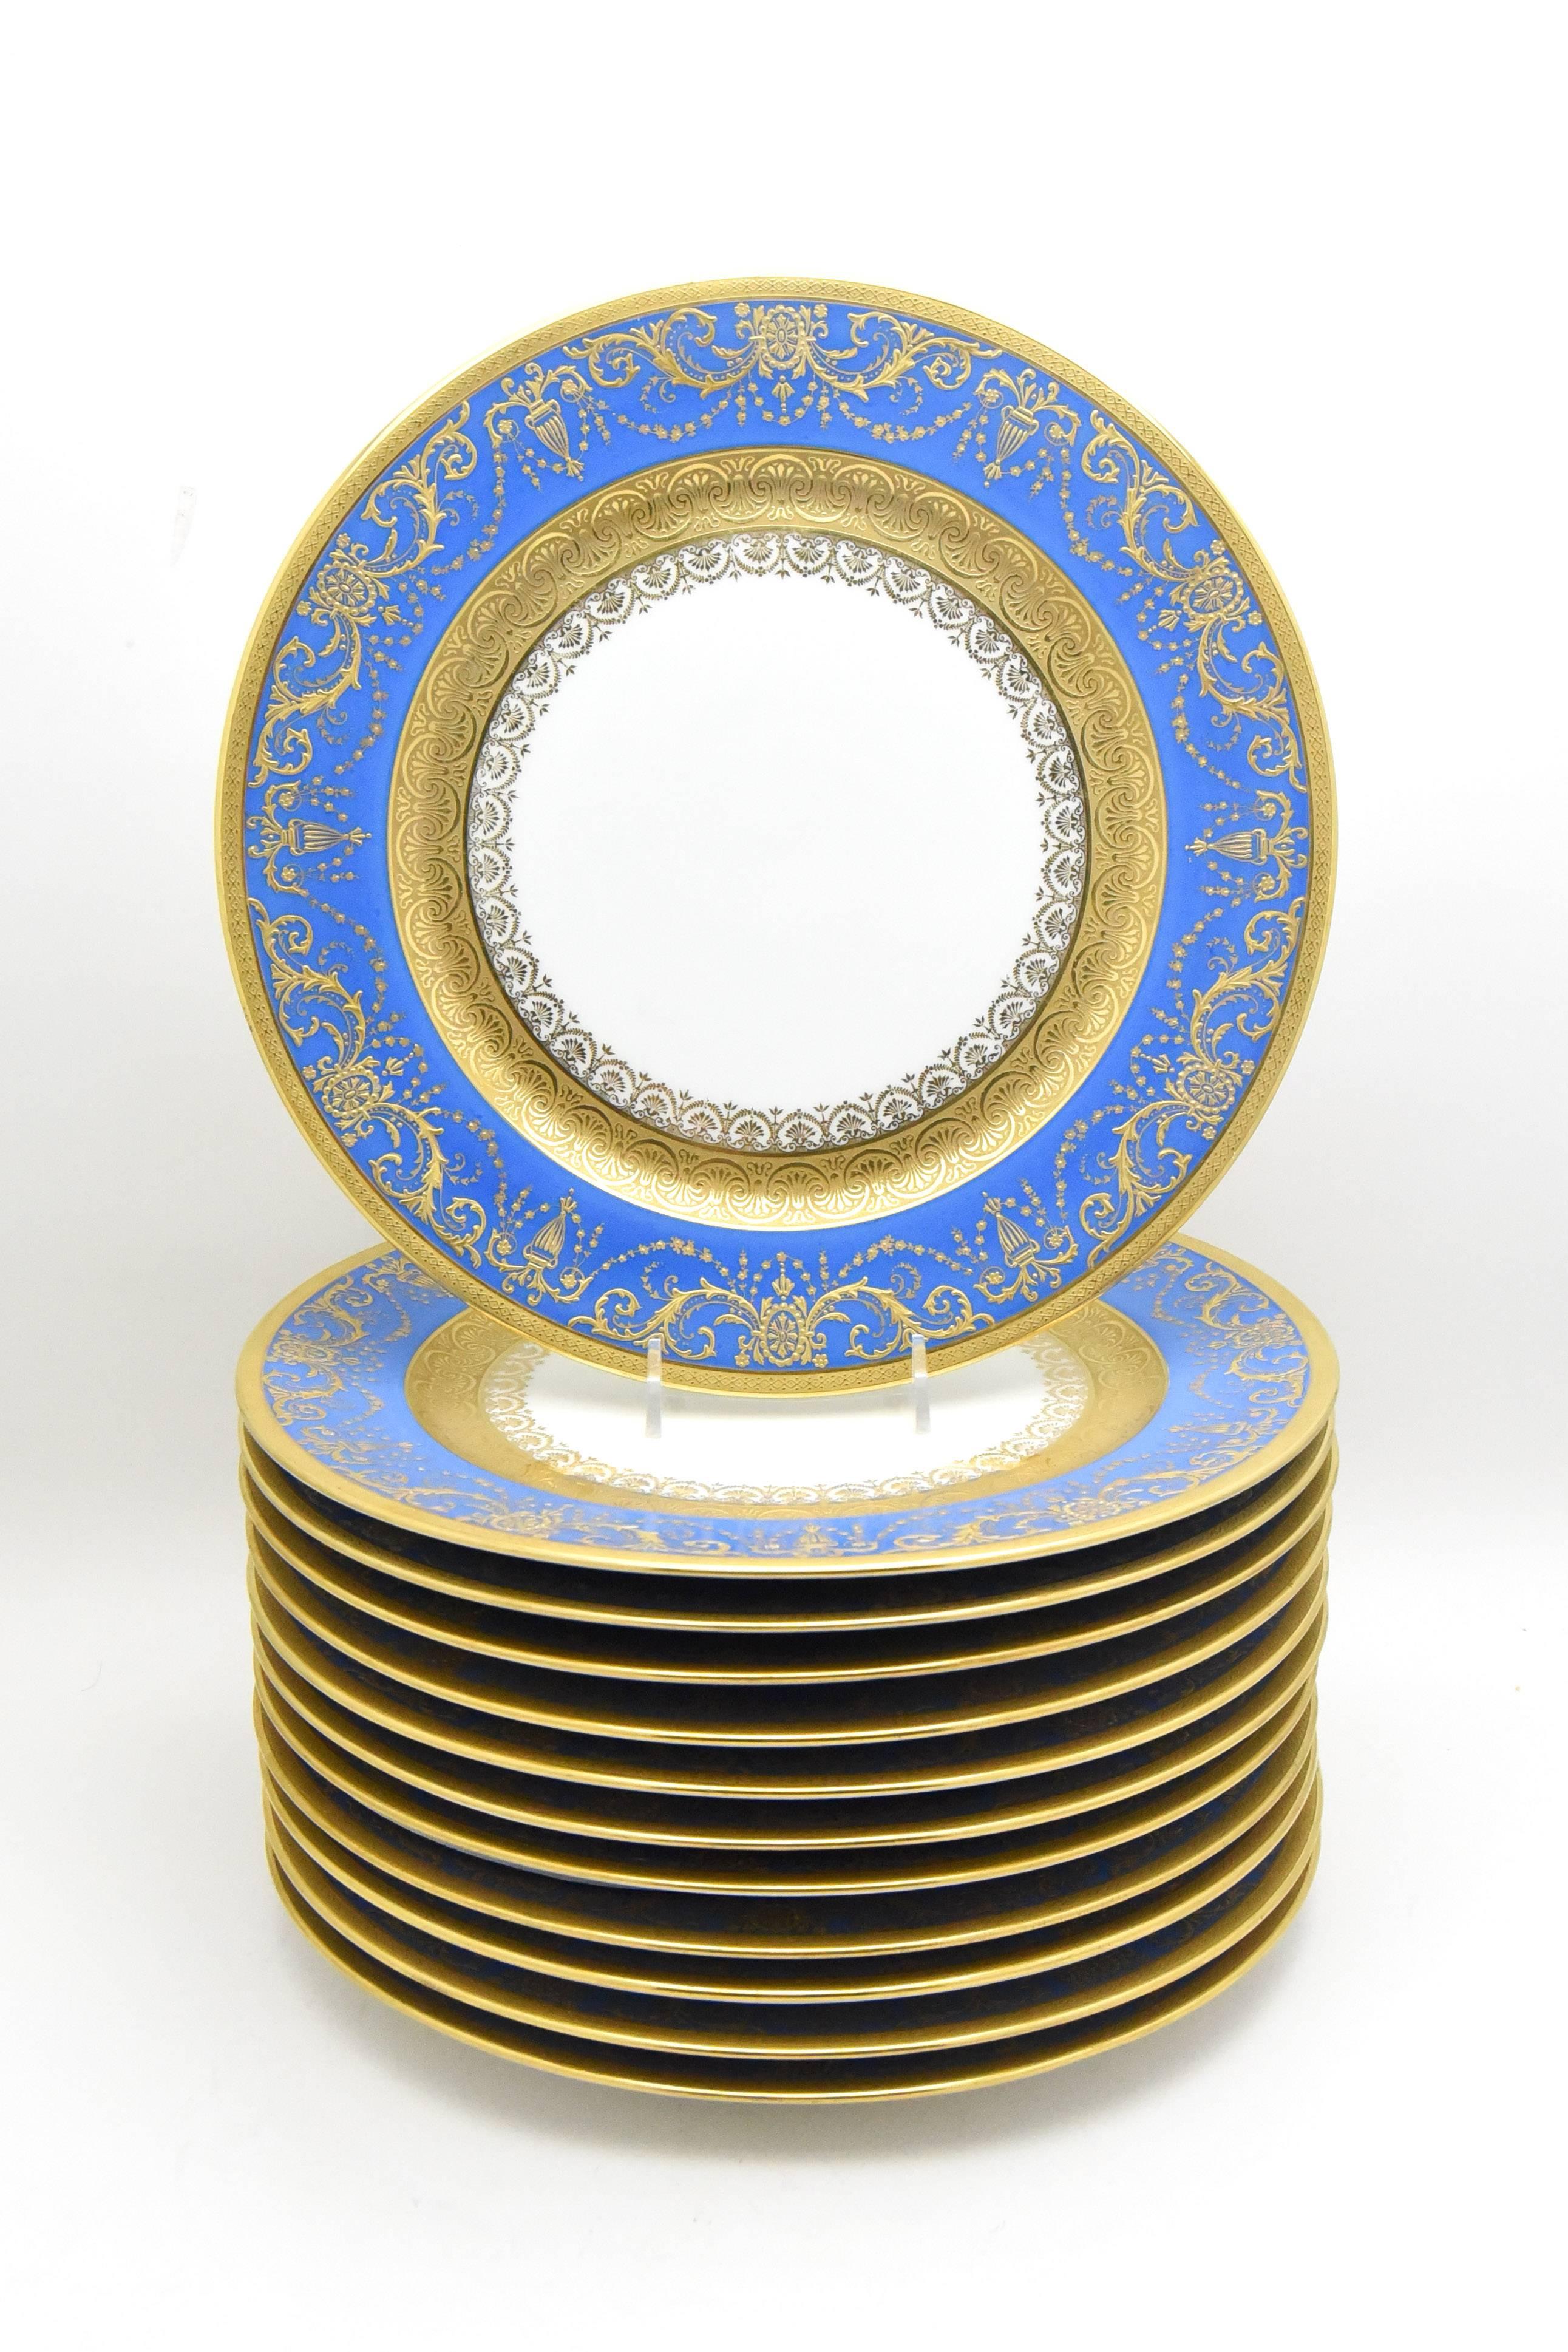 An unusual color and large size makes these 12 Limoges for J. E. Caldwell, plates a great addition to your tablescape. The periwinkle blue border adds a bright contrast to many palettes including, white and gold, floral motifs and pink, to create a